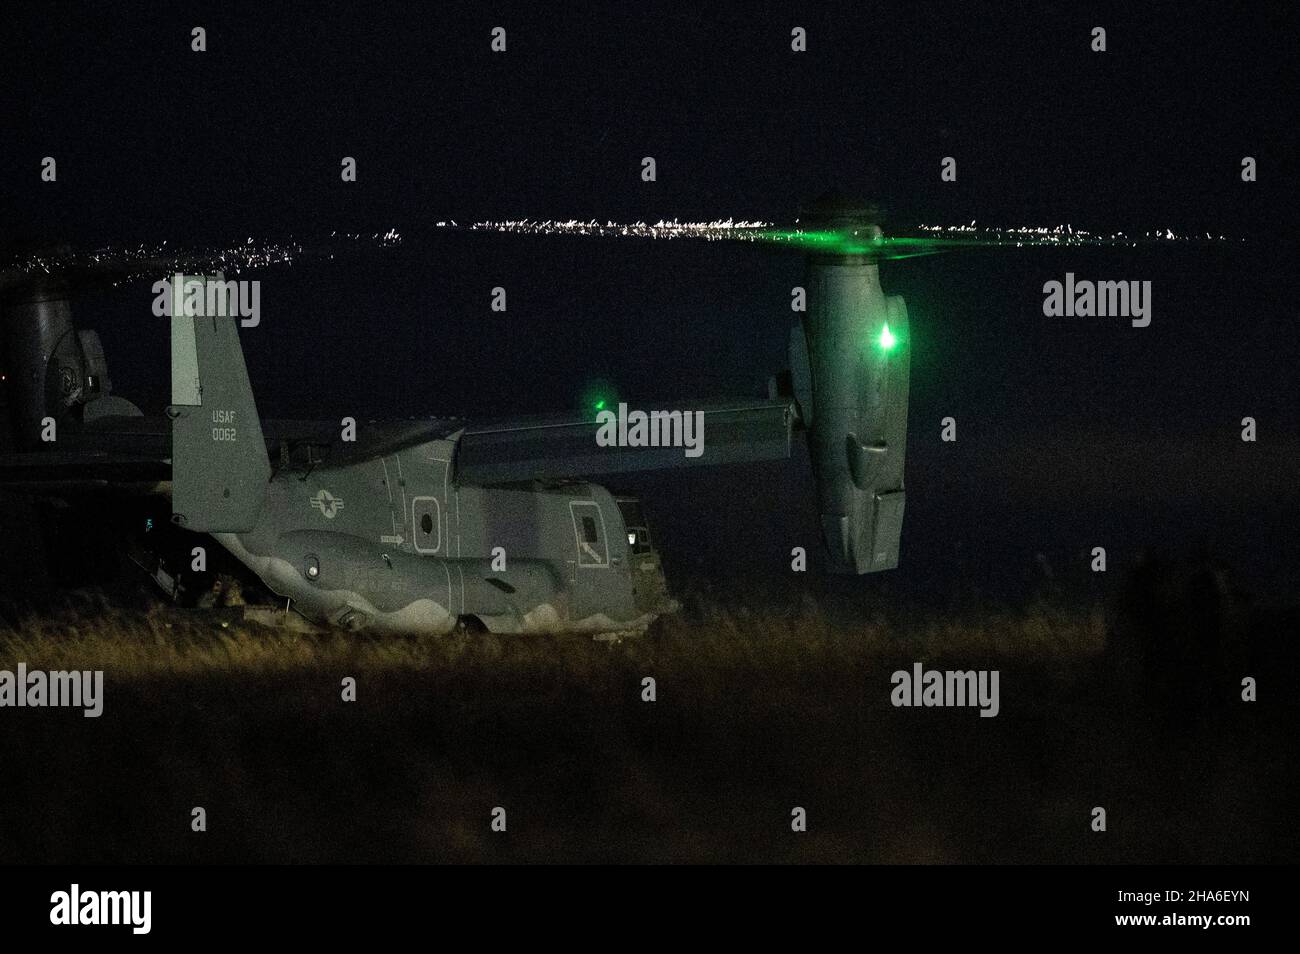 A CV-22 Osprey tilt-rotor aircraft assigned to the 8th Special Operations Squadron, prepares to take off from the Eglin Range Complex, Florida, Dec. 8, 2021. The 23rd Special Tactics Squadron conducted a large-scale humanitarian aid and disaster relief exercise involving approximately 300 participants designed to challenge ST Airmen with a complex tactical and leadership training environment they would encounter in a real-world humanitarian crisis. Special Tactics unit perform austere air control, terminal attack control, personnel rescue and recovery, assault zone assessments, battlefield tra Stock Photo